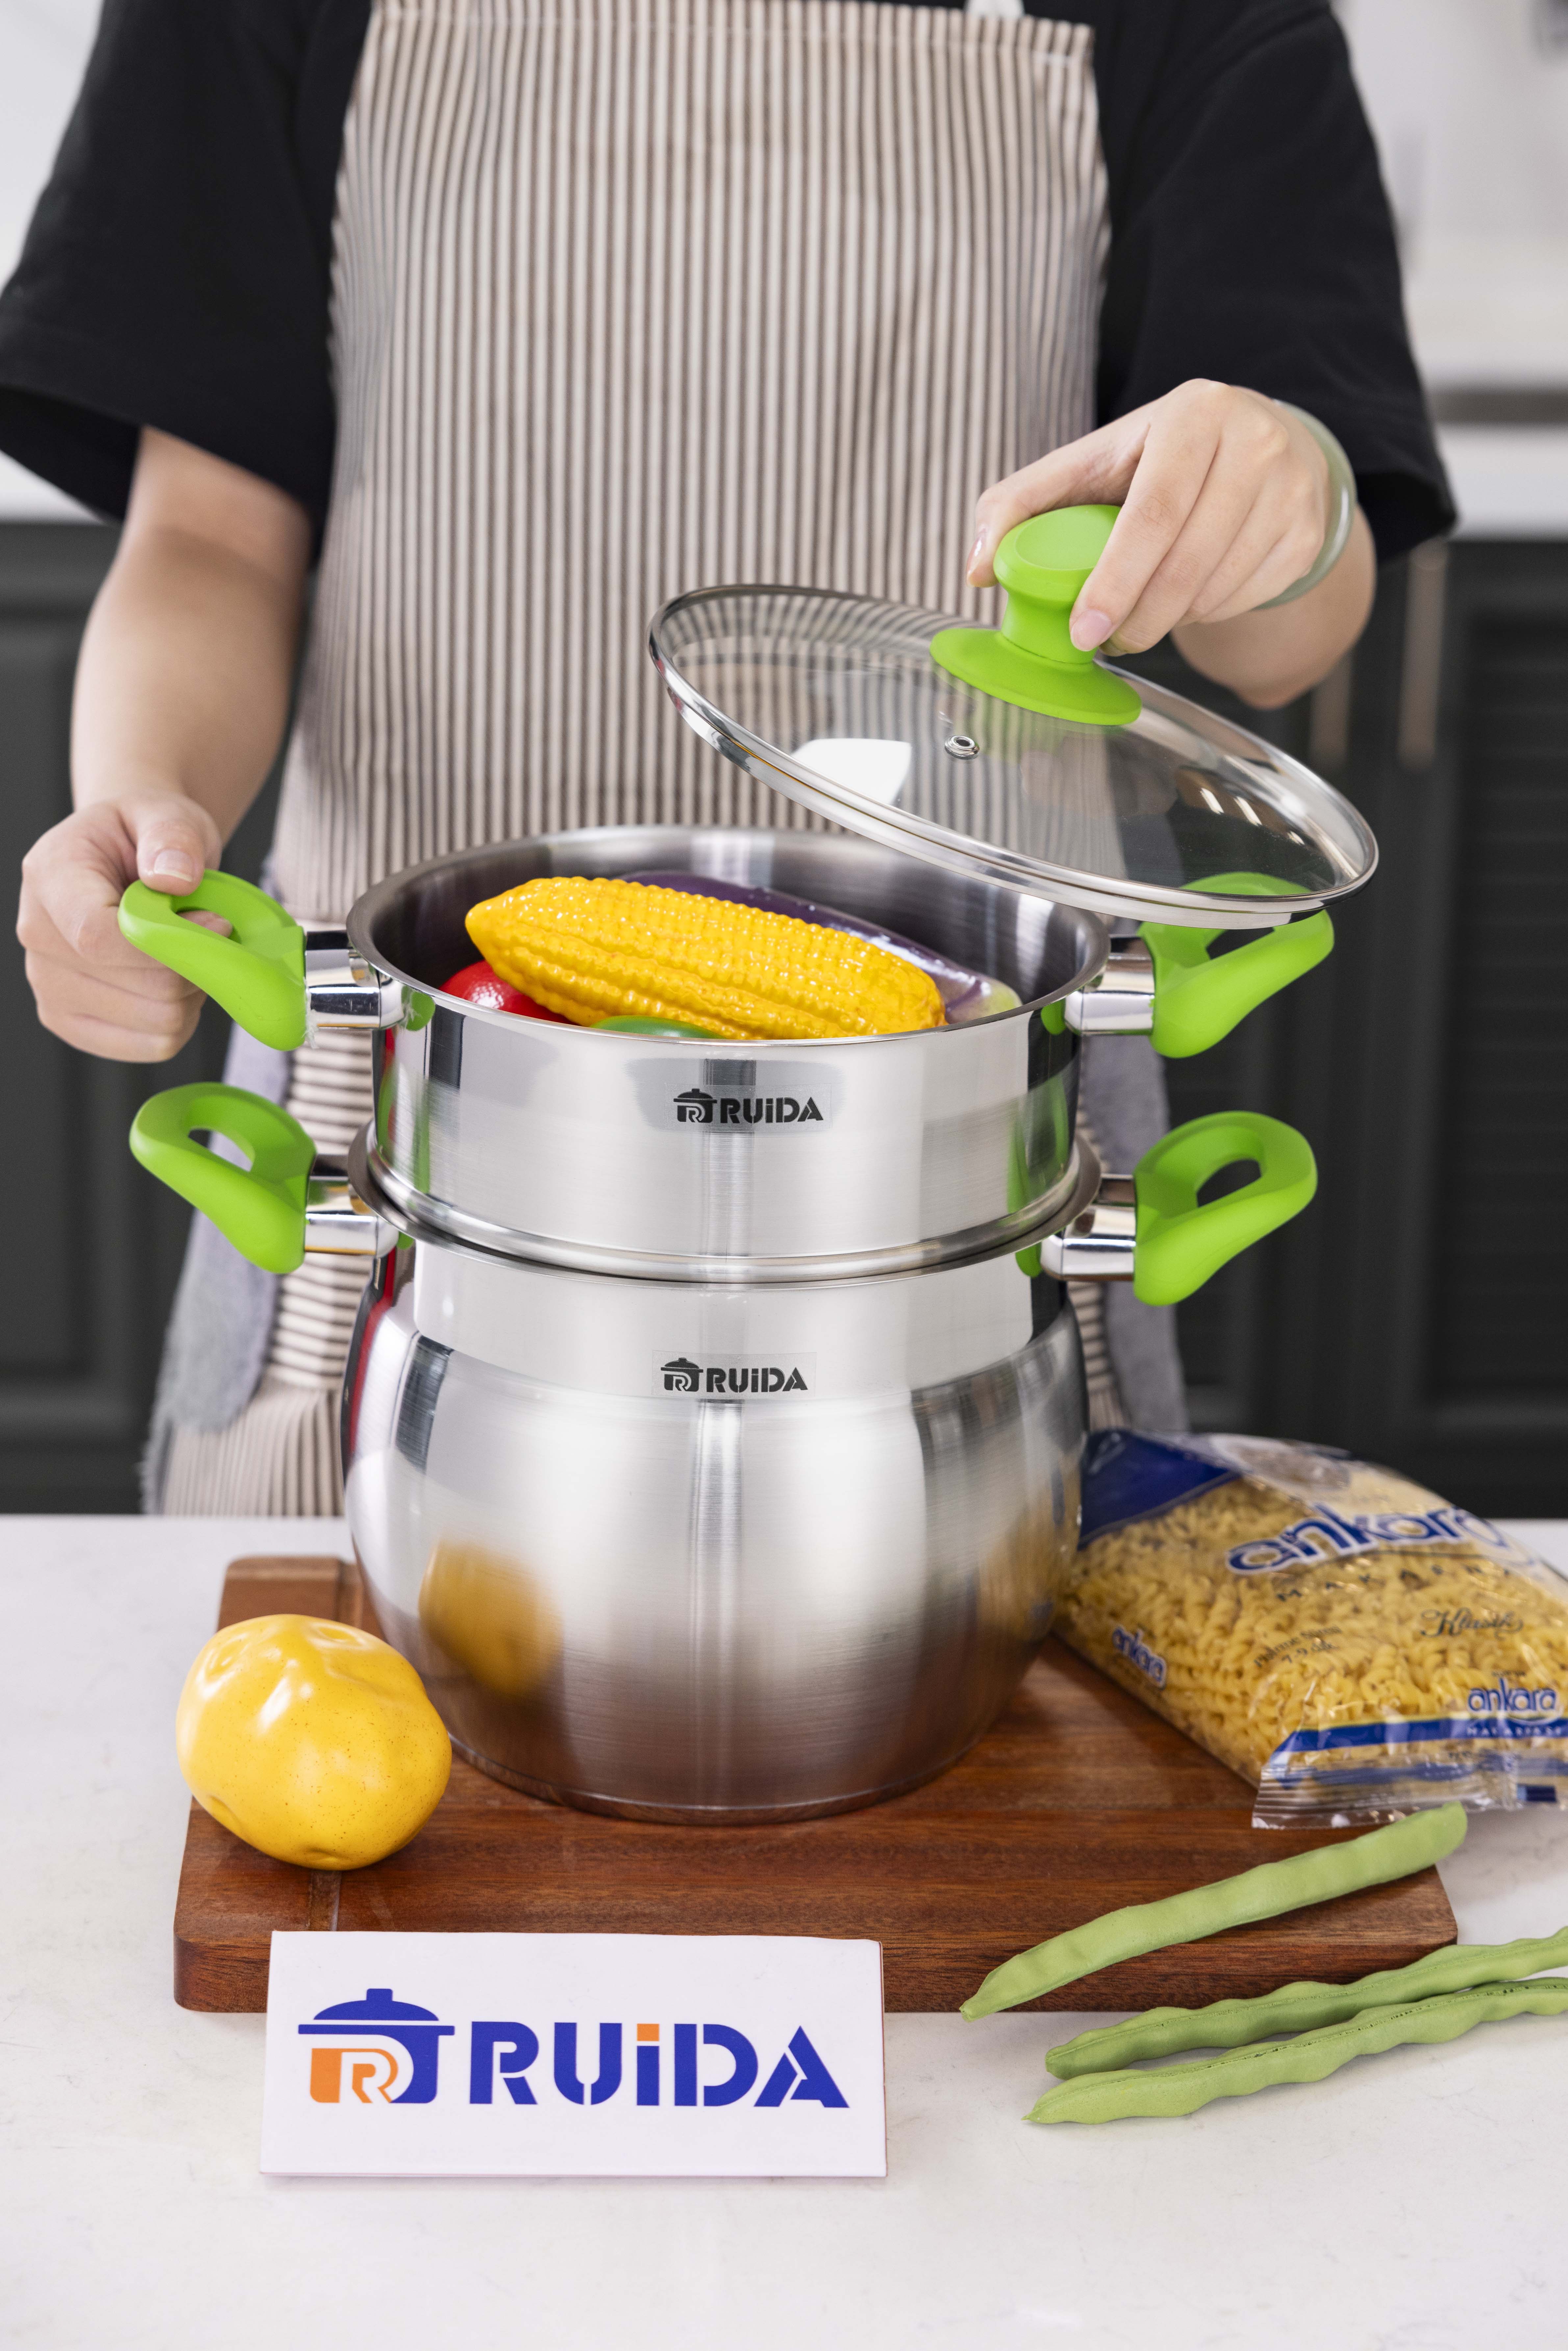 Stainless Steel Stock Soup Cooking Pot Steamer Couscous Pot